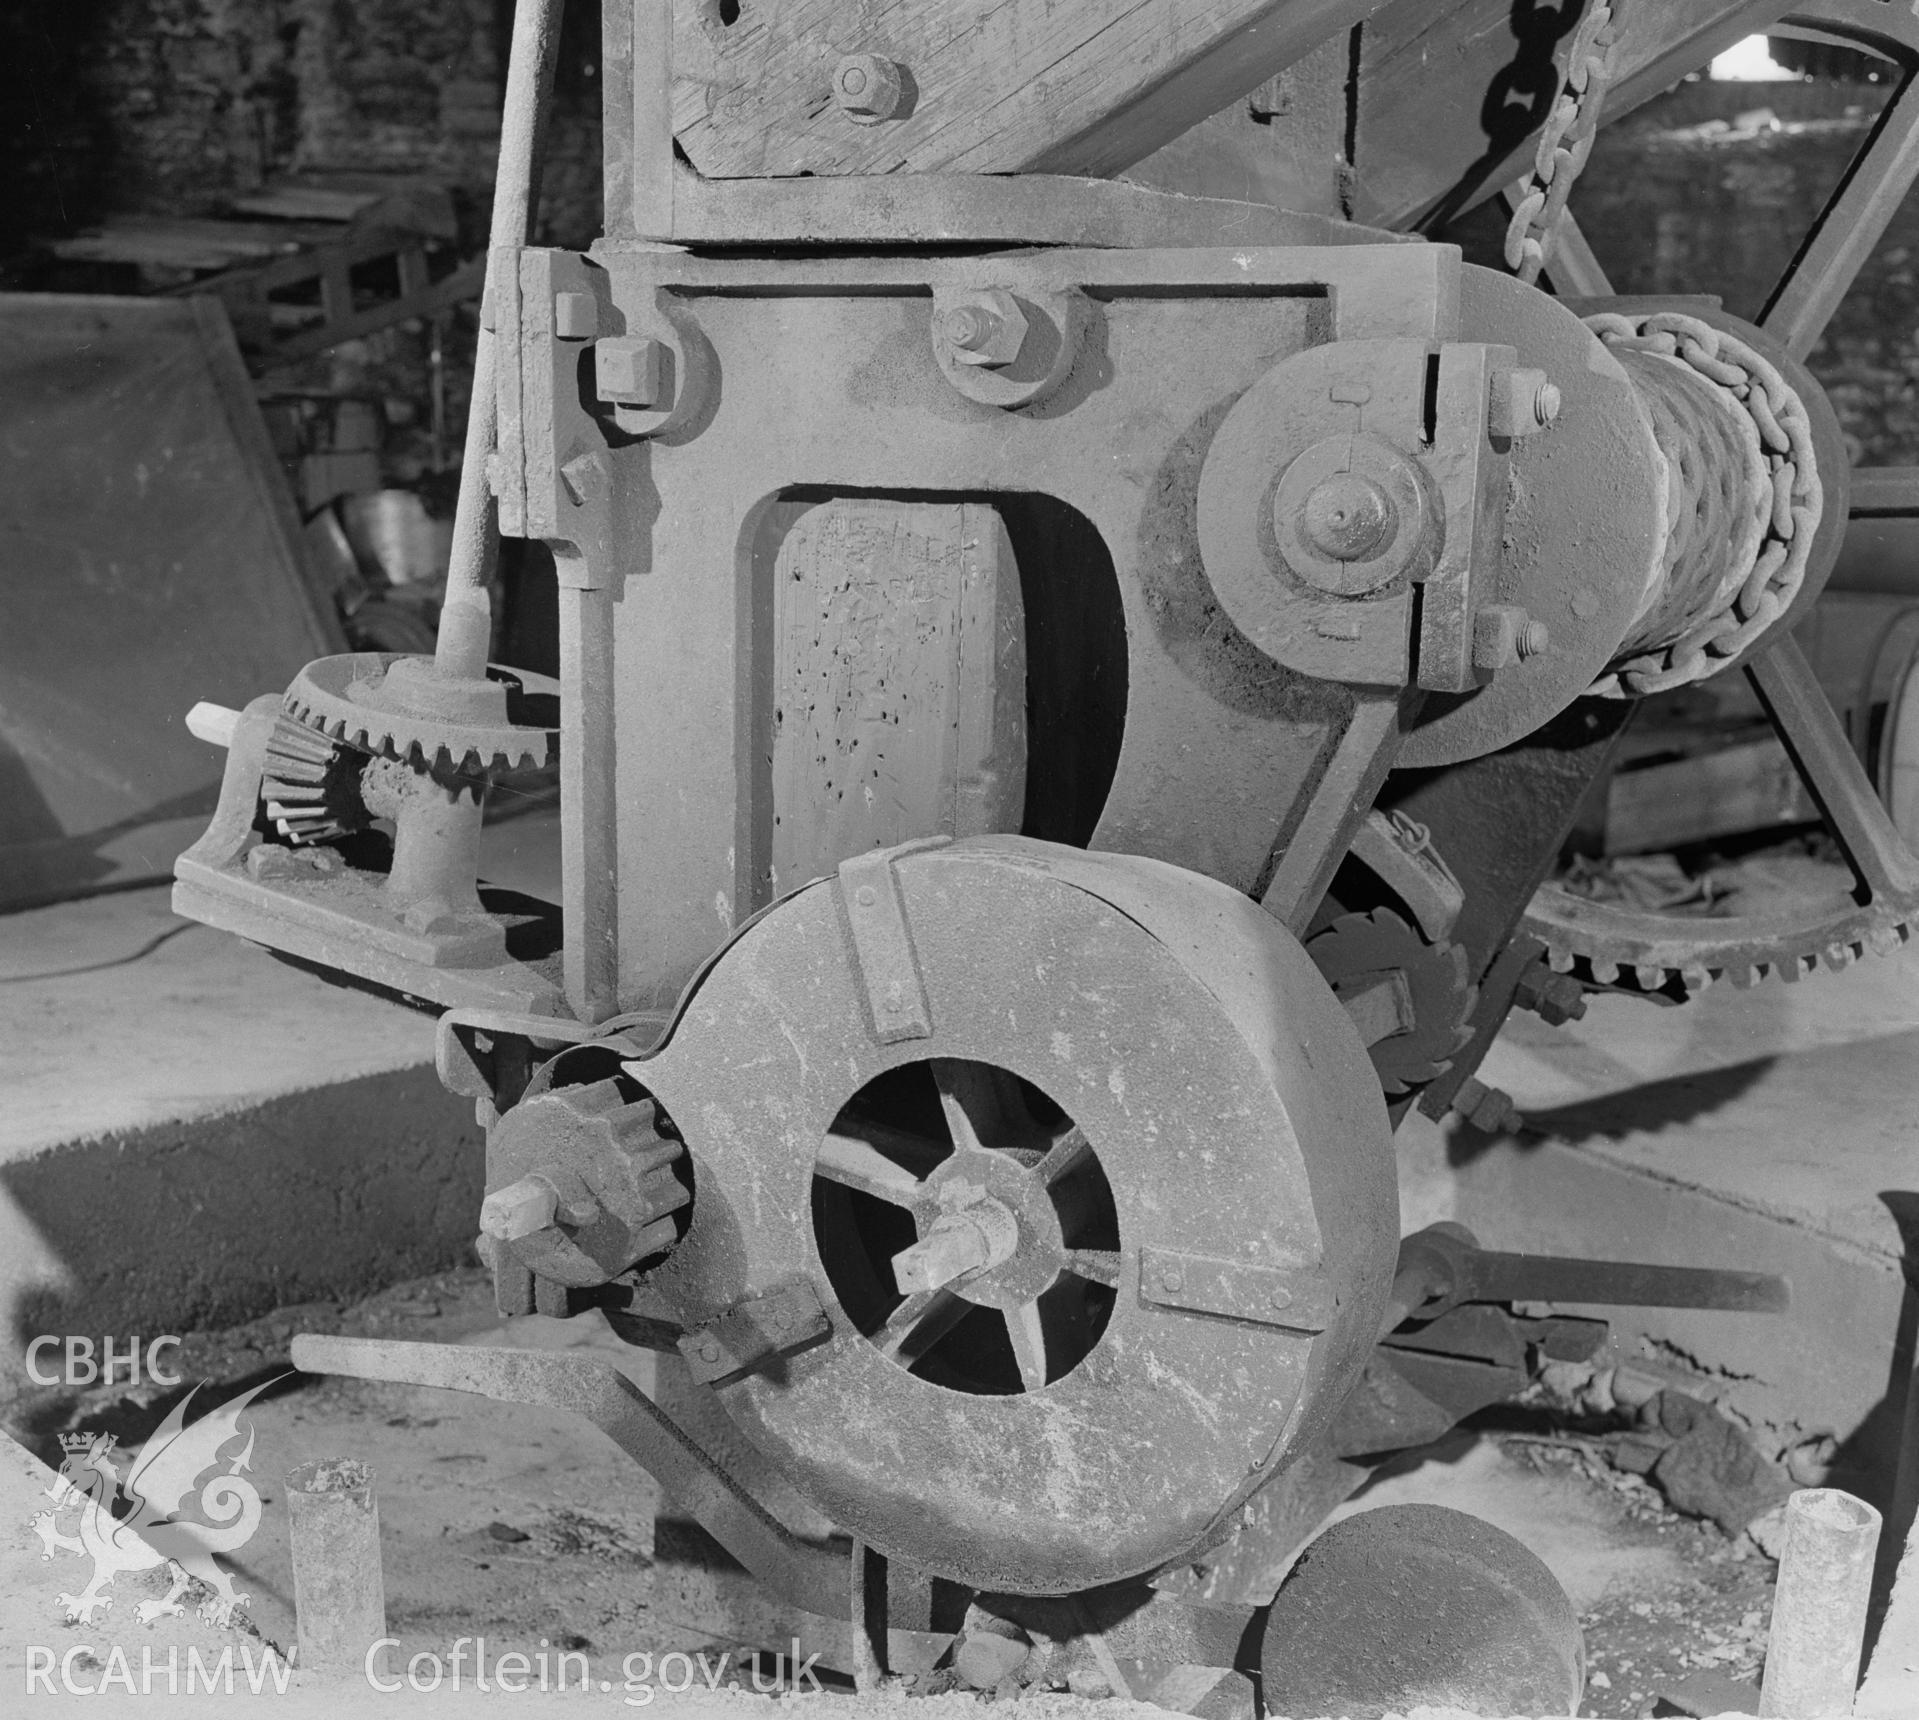 Digital copy of a black and white negative showing detail of the crane at Player's Works Foundry, Clydach, taken by RCAHMW, undated